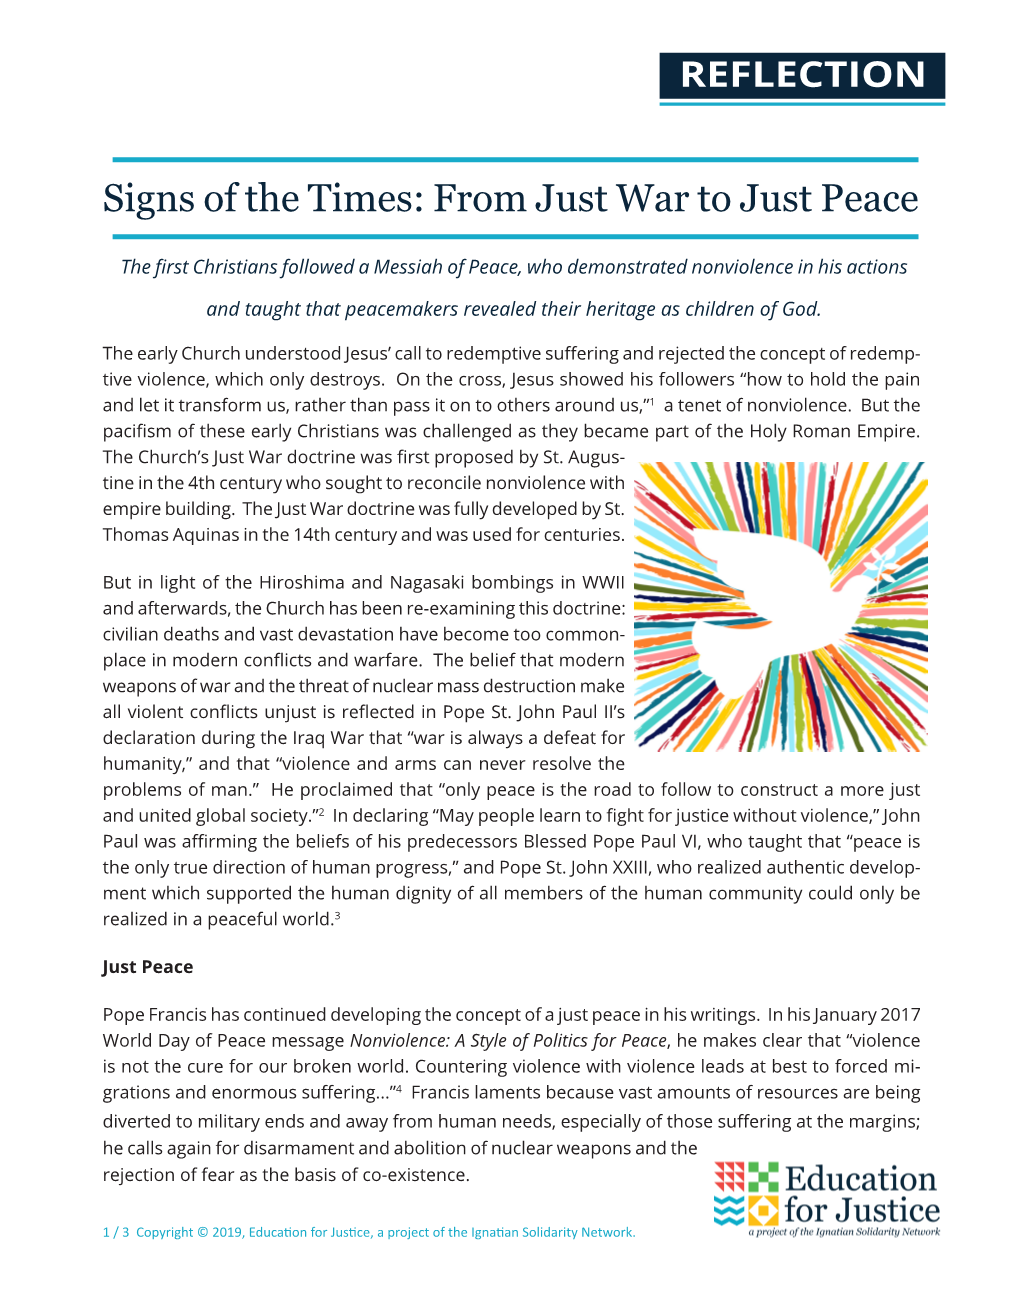 Signs of the Times: from Just War to Just Peace